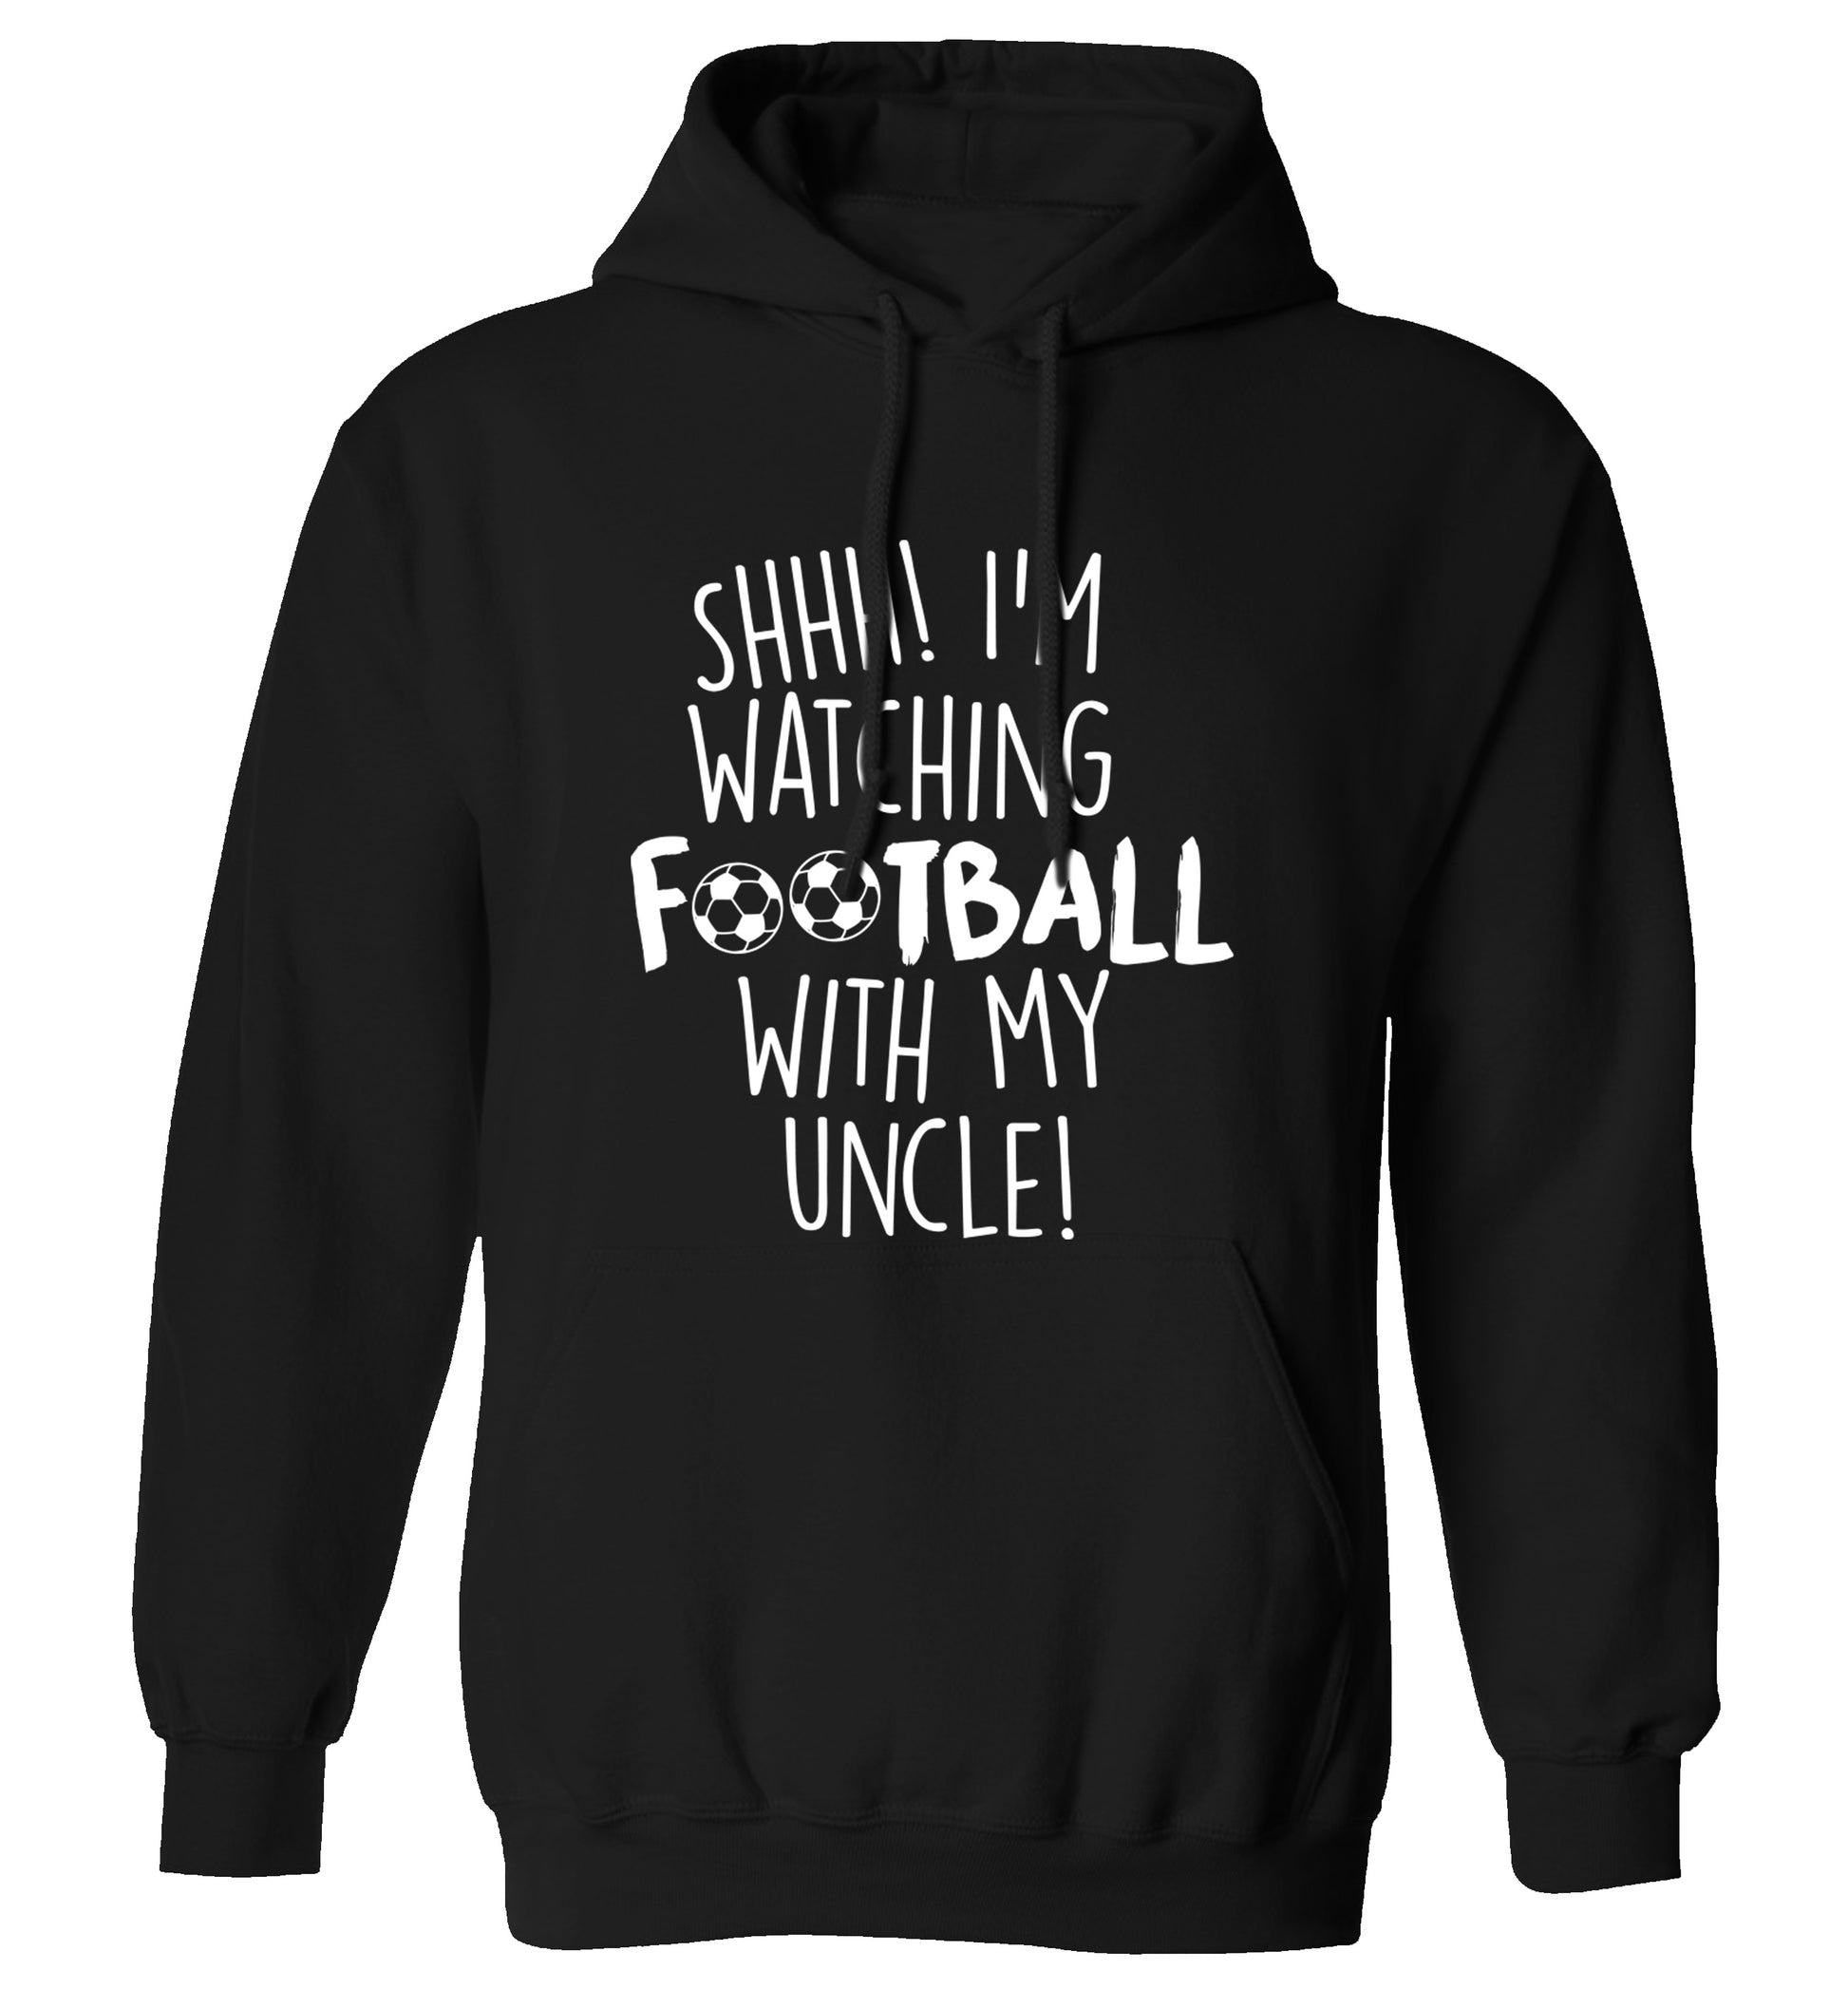 Shhh I'm watching football with my uncle adults unisexblack hoodie 2XL